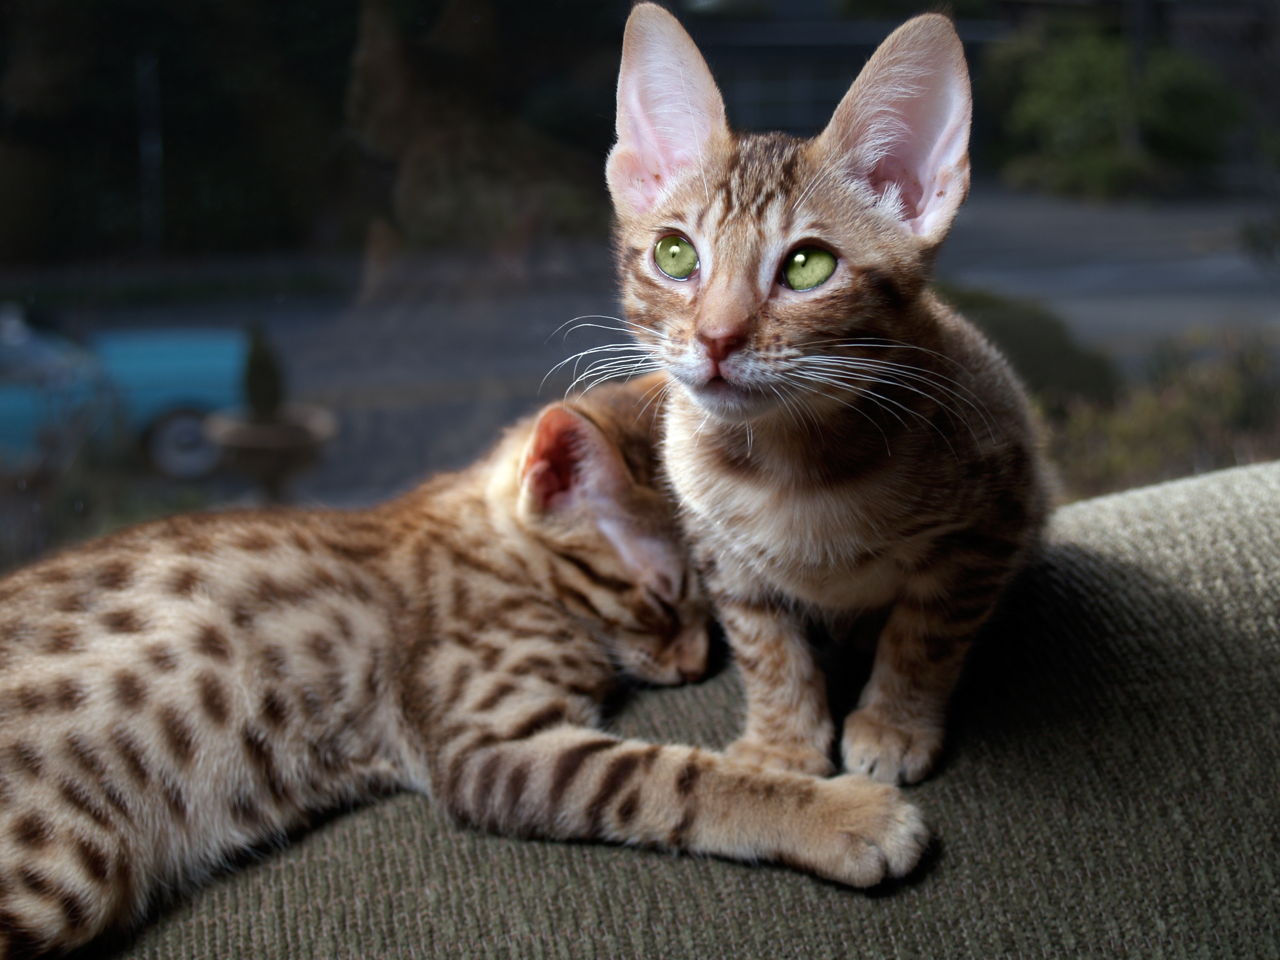 7 Large Domestic Cat Breeds That Make for Affectionate Companions Cat